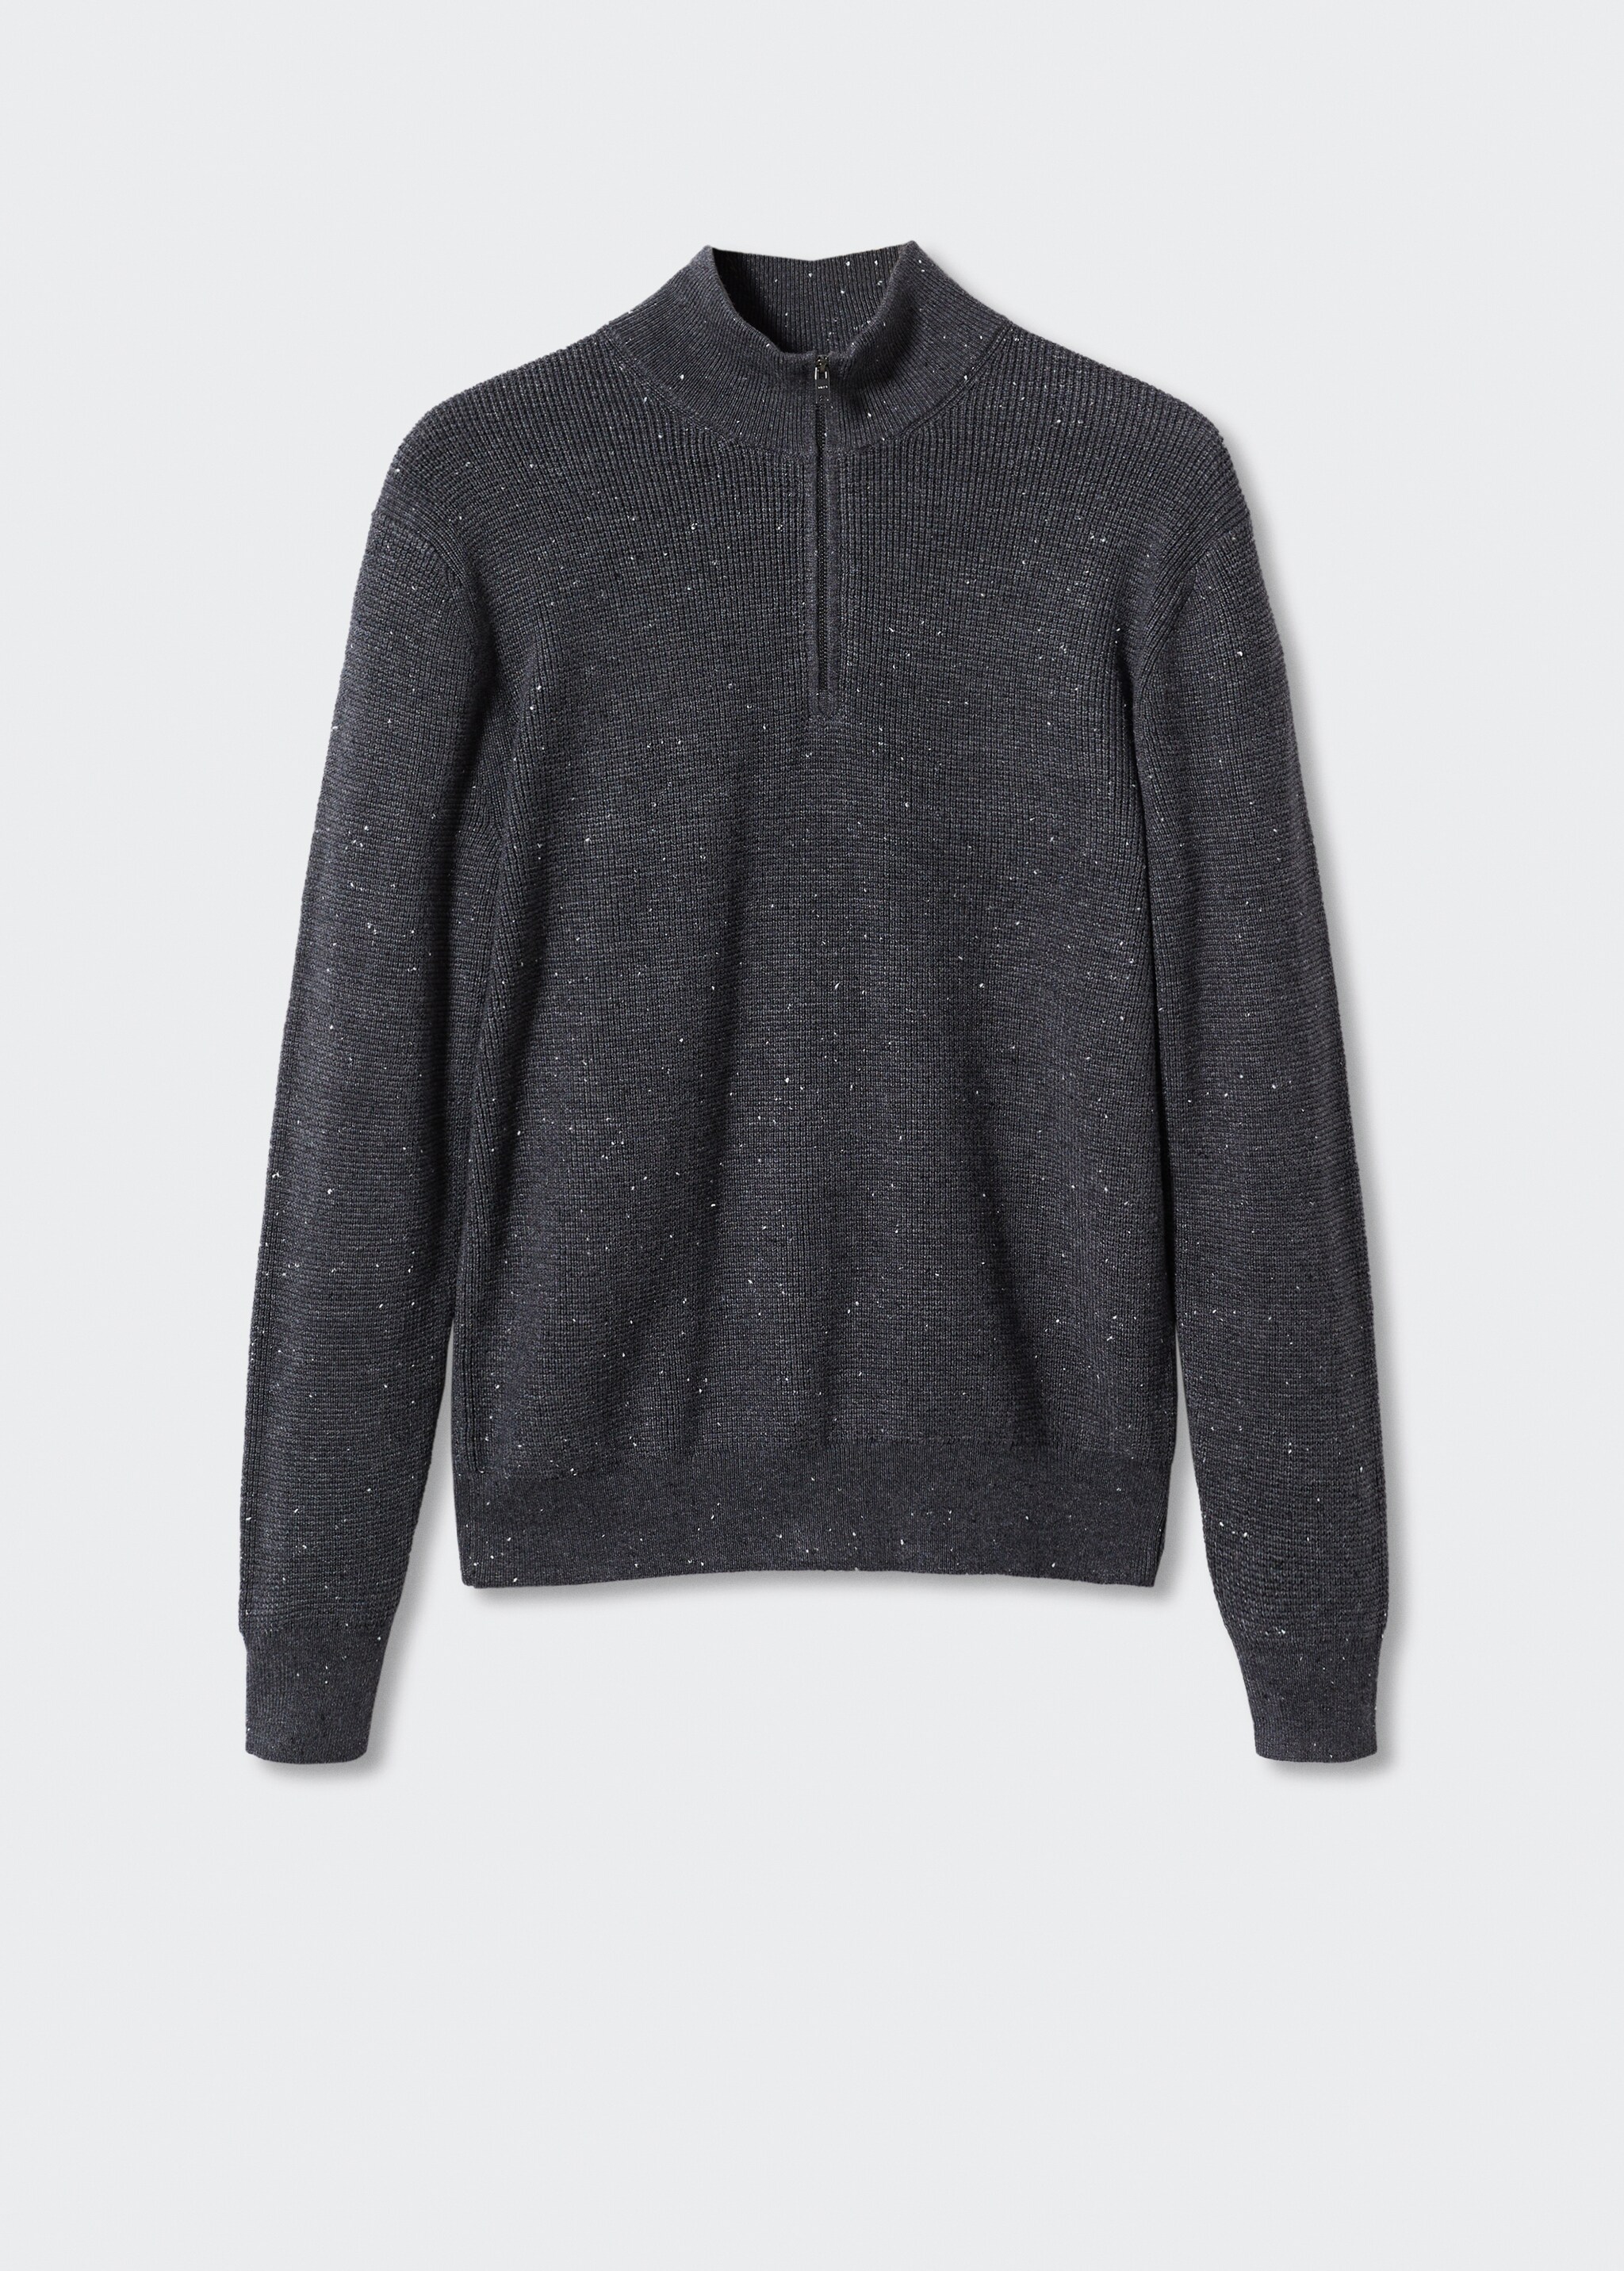 Wool zip neck jumper - Article without model